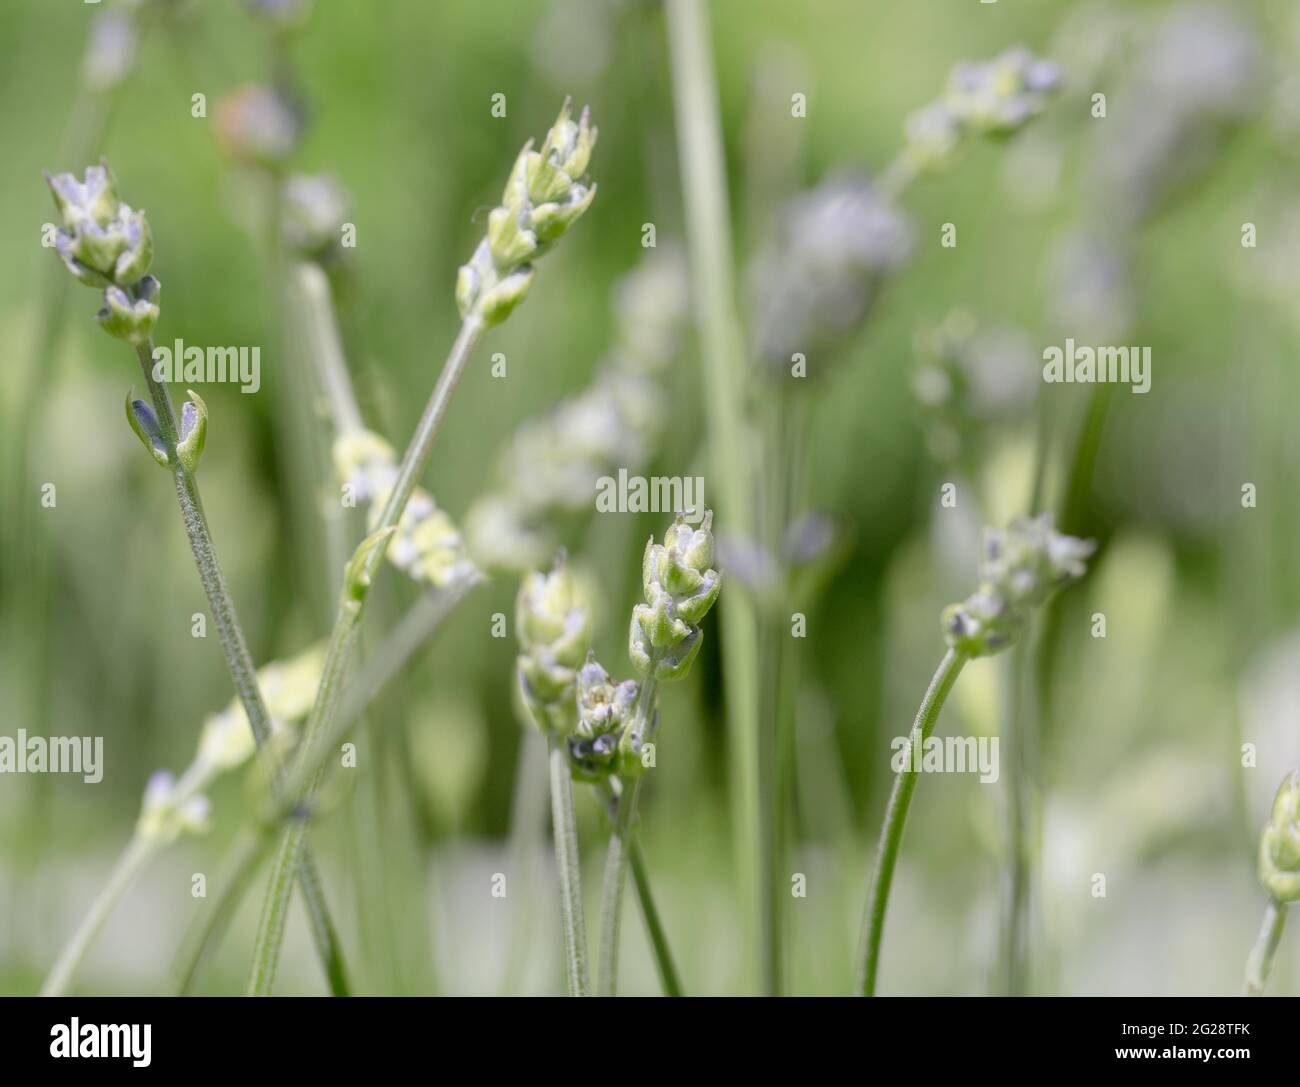 A full frame flower background of the stalks and flowers of aromatic lavender plants with copy space Stock Photo